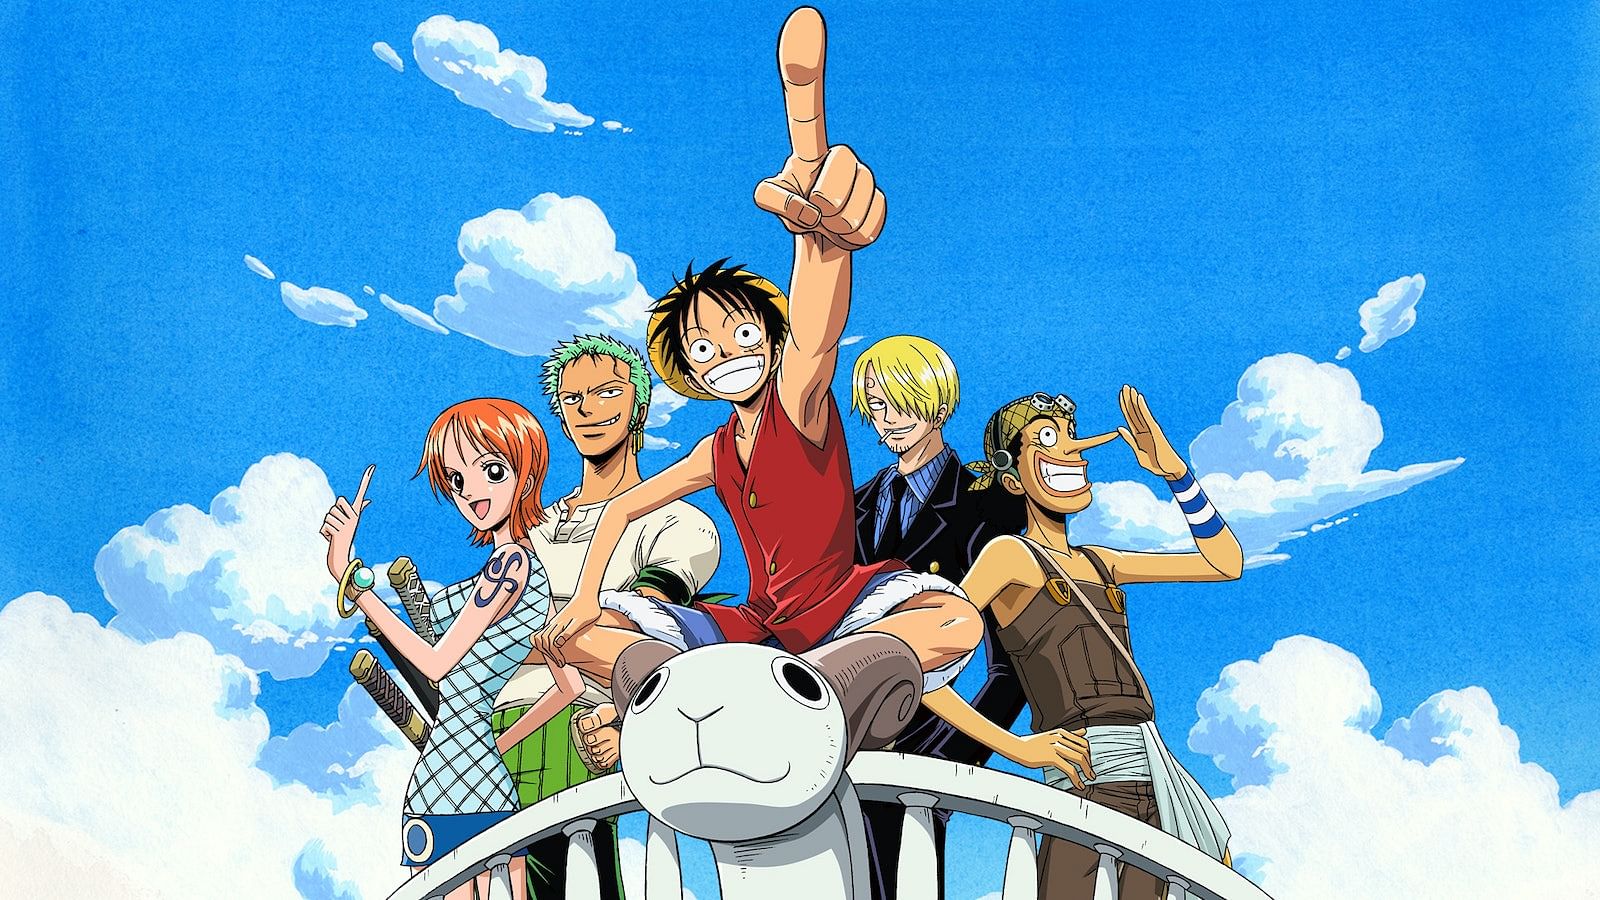 Anime:One Piece Copyright: I Have No Rights On The Anime Images